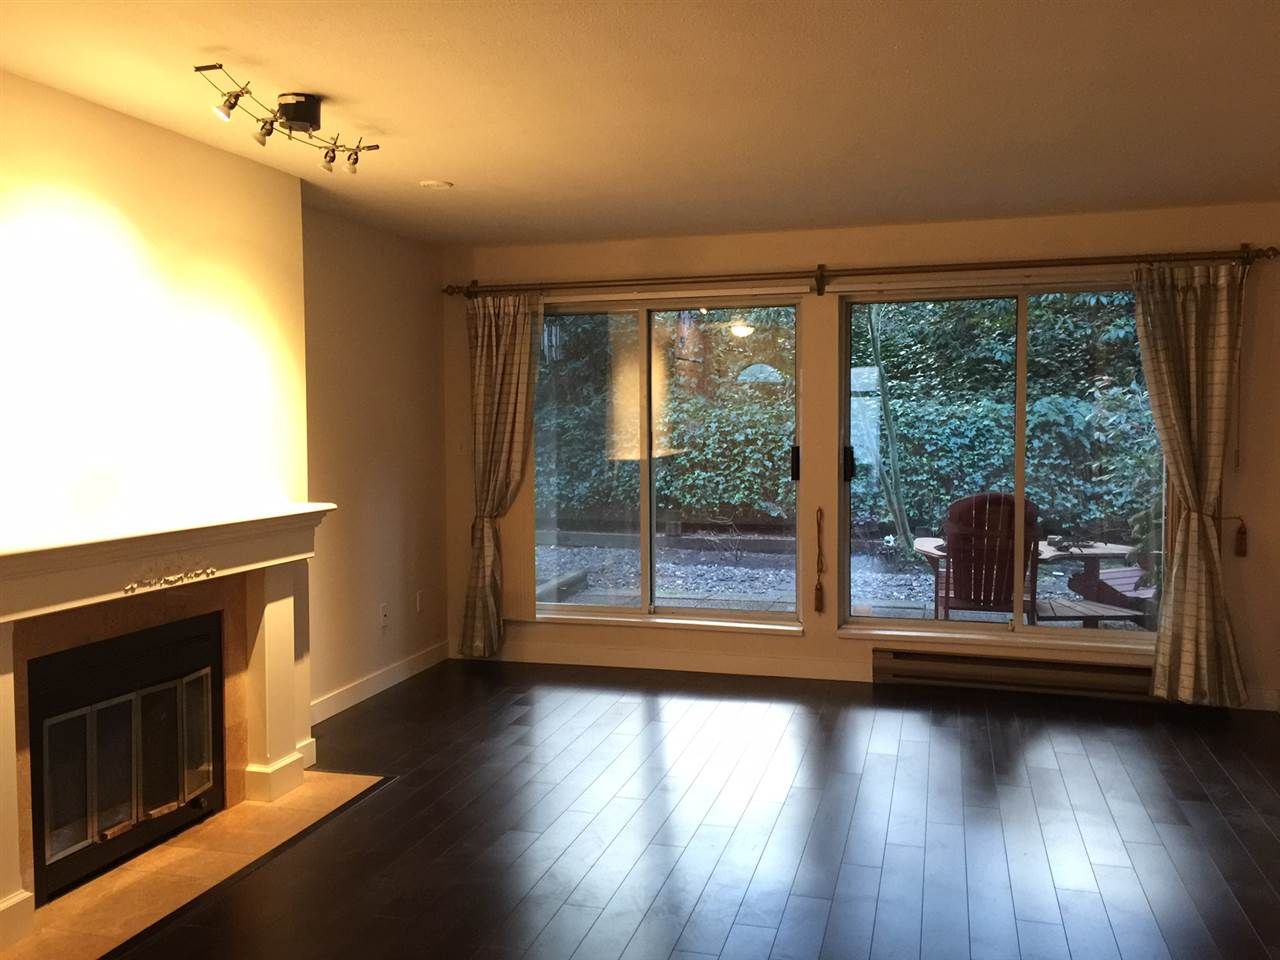 Photo 3: Photos: 204 2733 ATLIN Place in Coquitlam: Coquitlam East Condo for sale : MLS®# R2046230